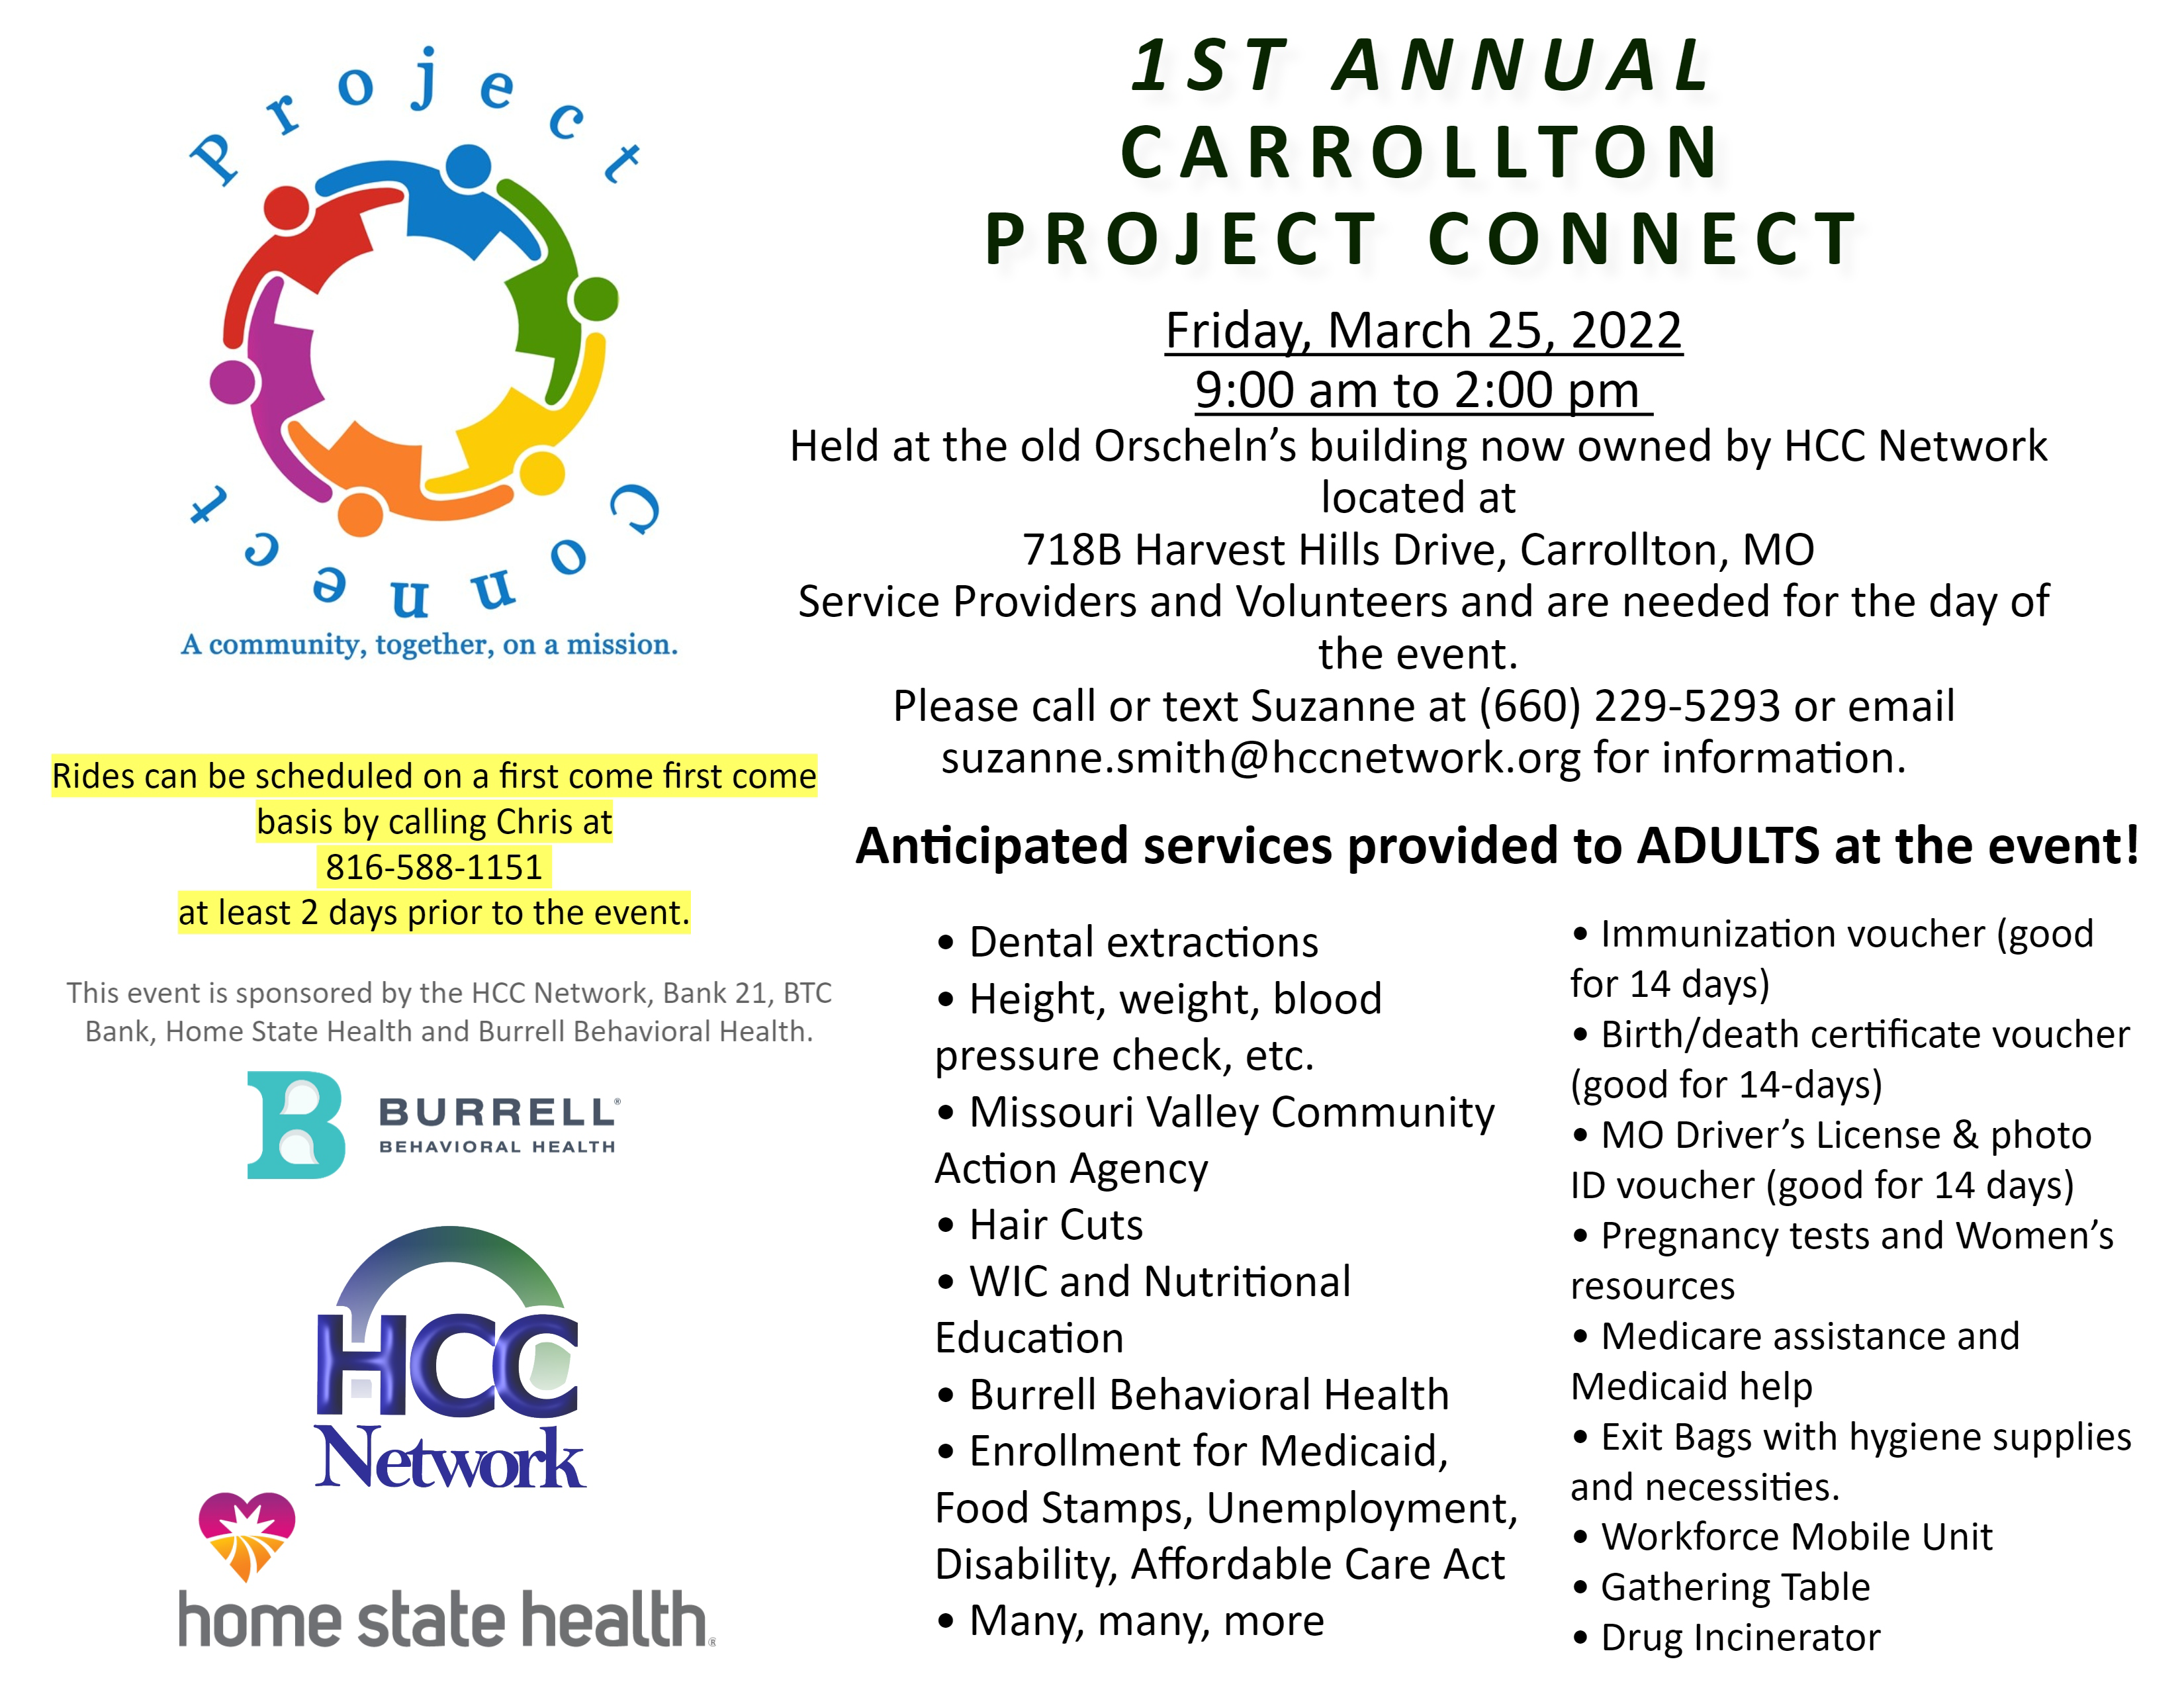 1ST ANNUAL CARROLLTON PROJECT CONNECT Friday, March 25, 2022 9:00 am to 2:00 pm Held at the old Orscheln's building now owned by HCC Network located at 718B Harvest Hills Drive, Carrollton, MO Service Providers and Volunteers and are needed for the day of the event. Please call or text Suzanne at {660) 229-5293 or email suzanne.smith@hccnetwork.org for information. 